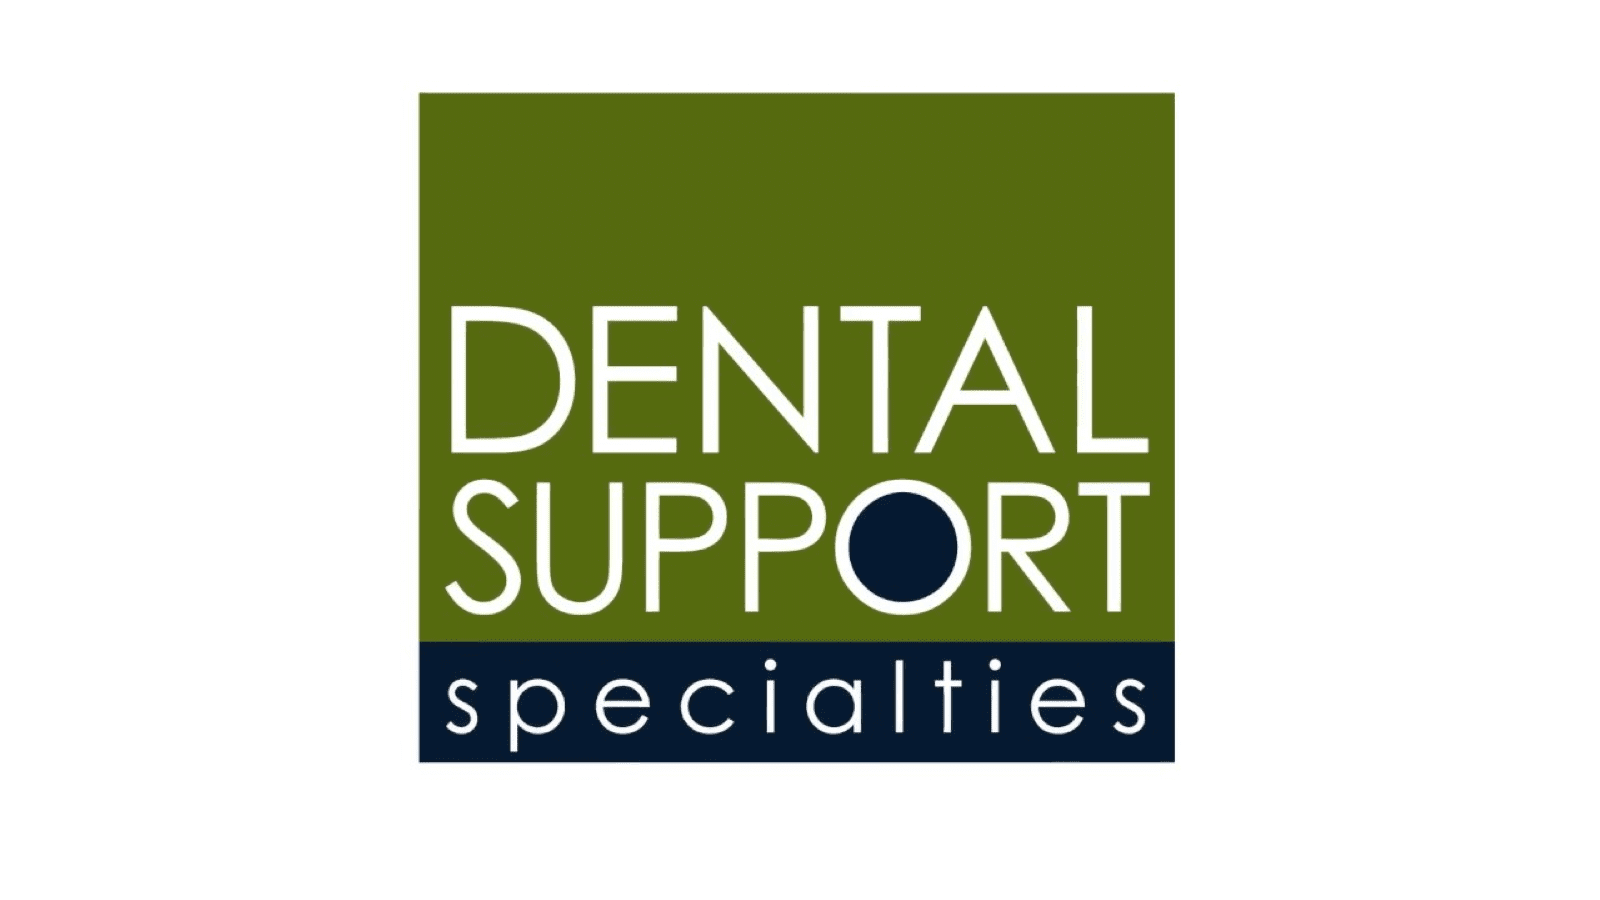 Dental support specialists